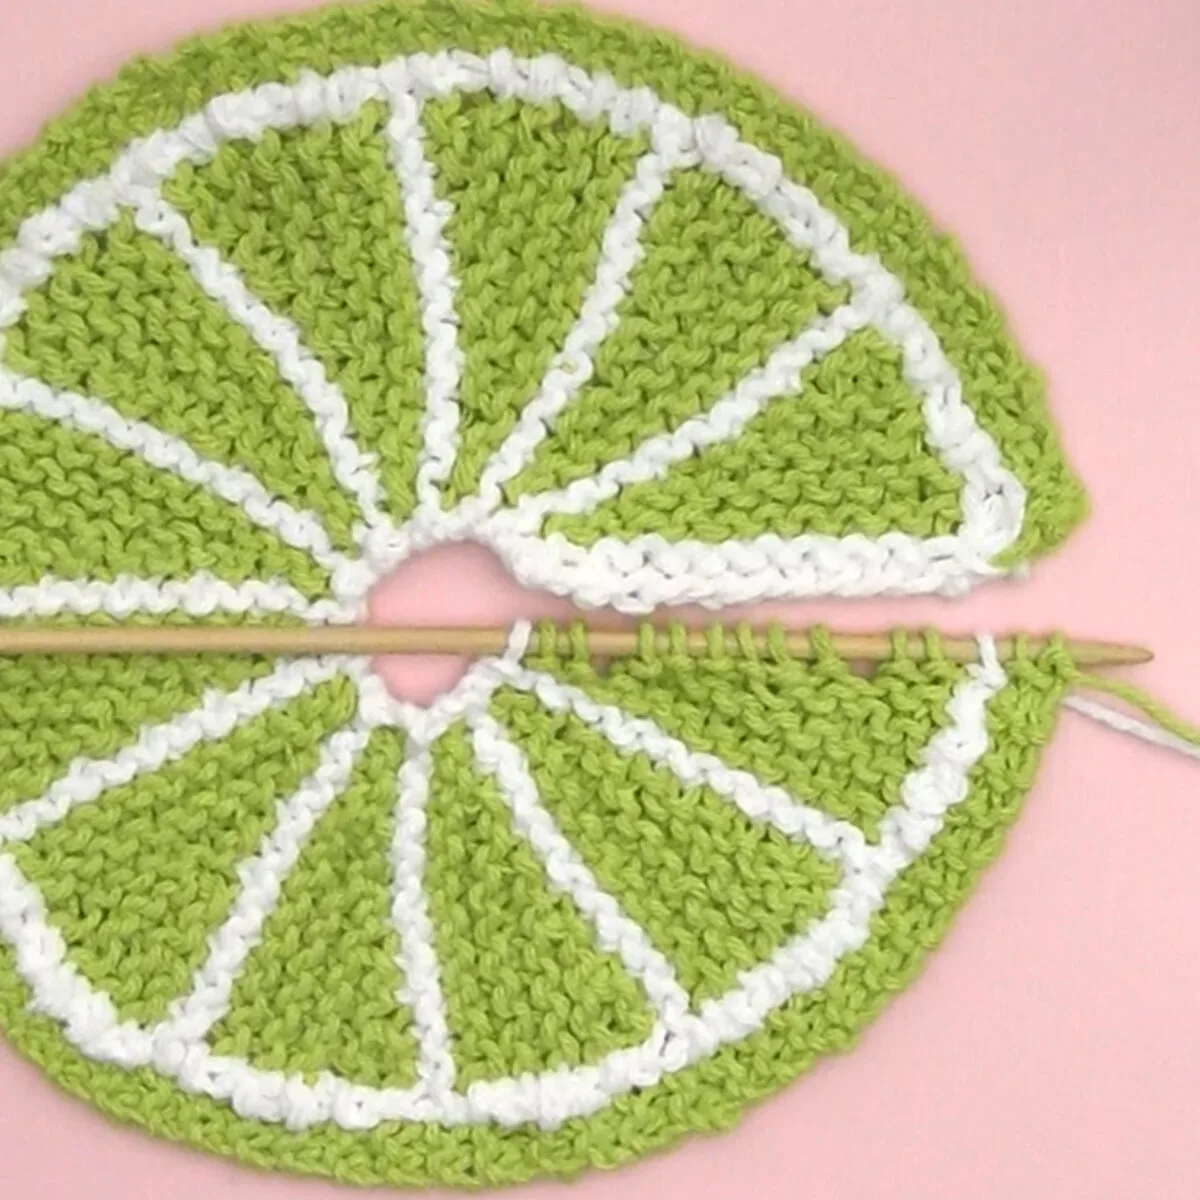 Knitted fruit slice shape in green color yarn atop a pink background.